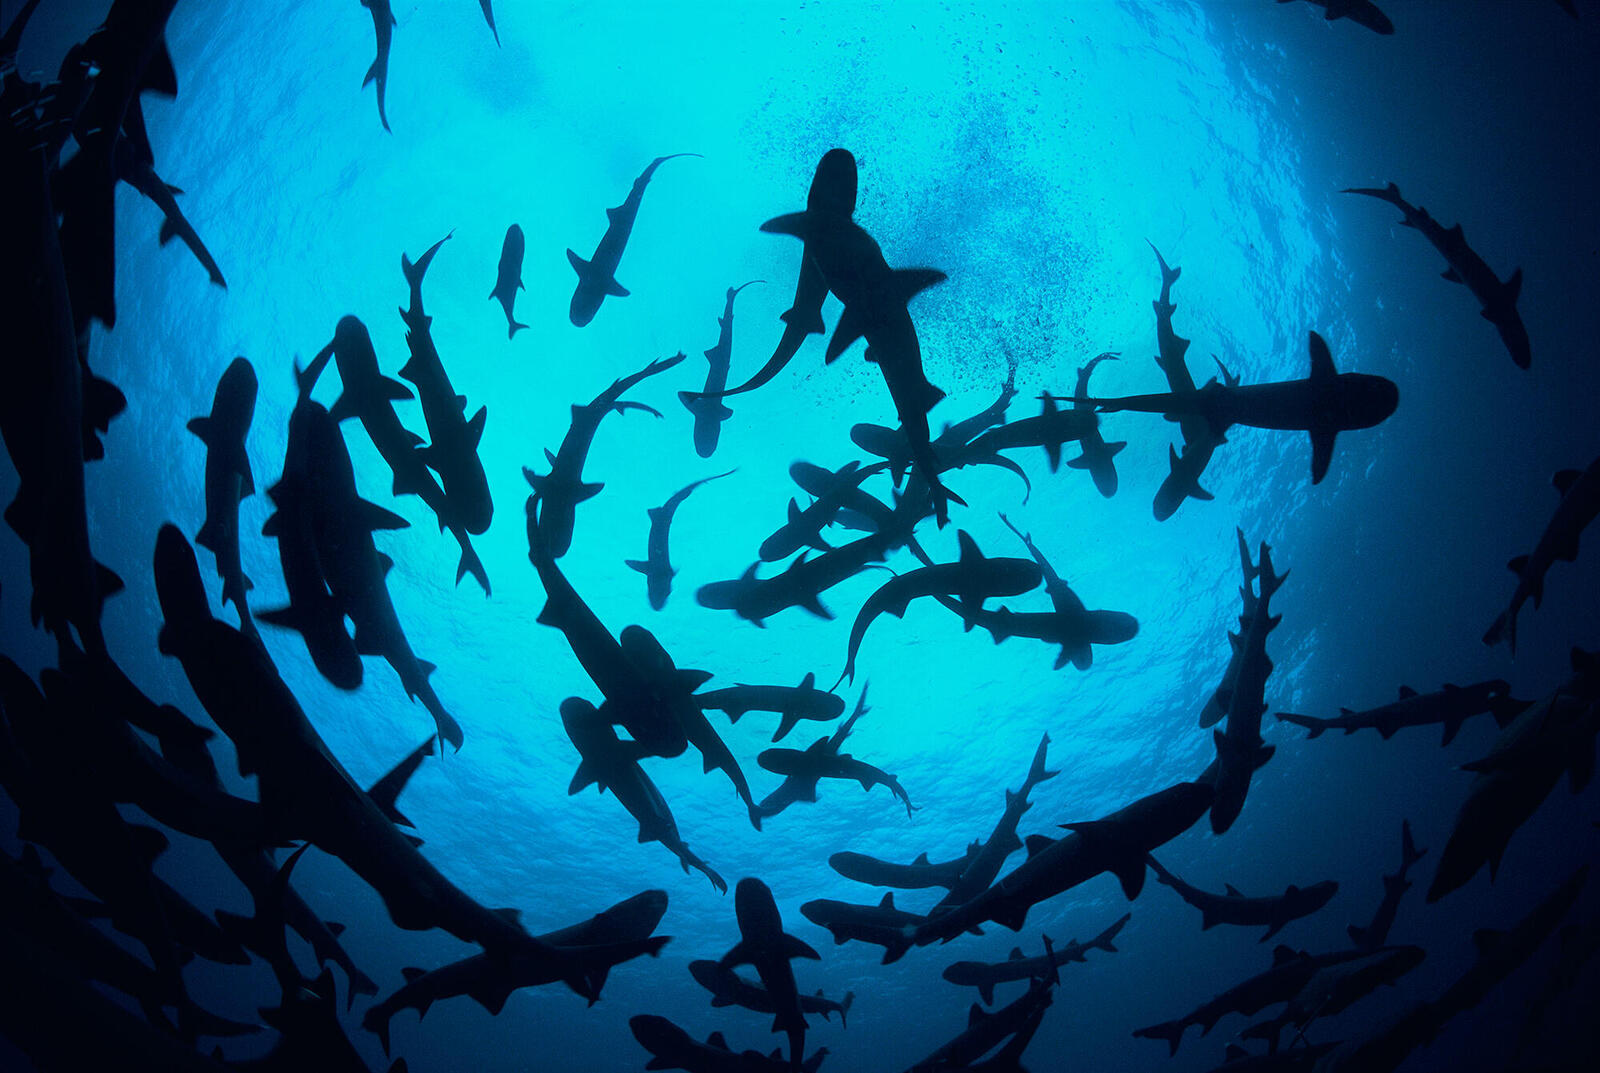 Circling sharks from beneath